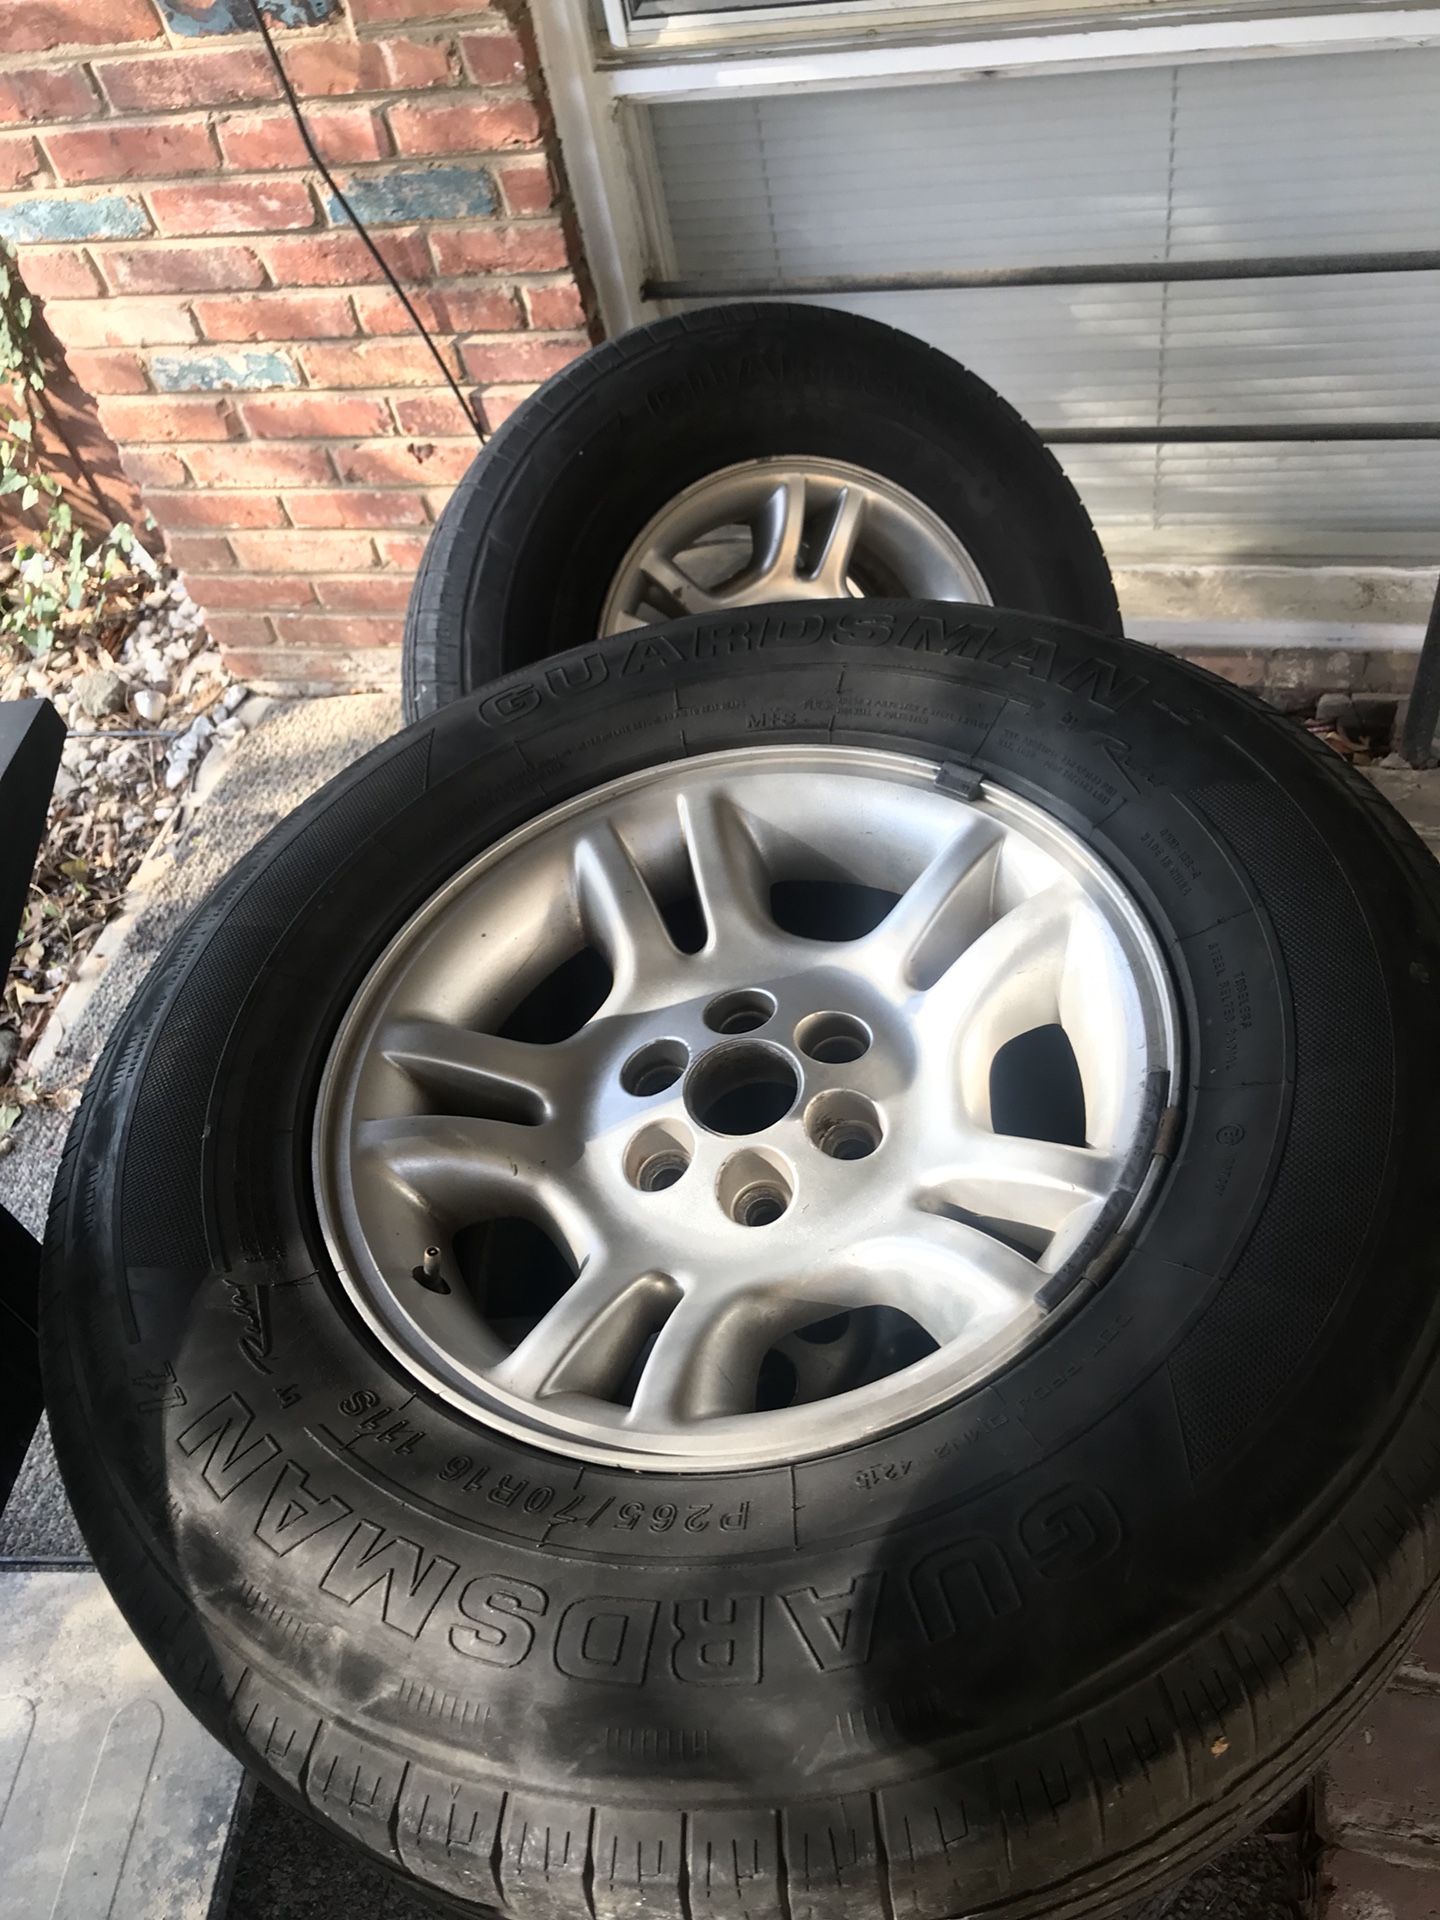 Rim and tires for sale 16 inch